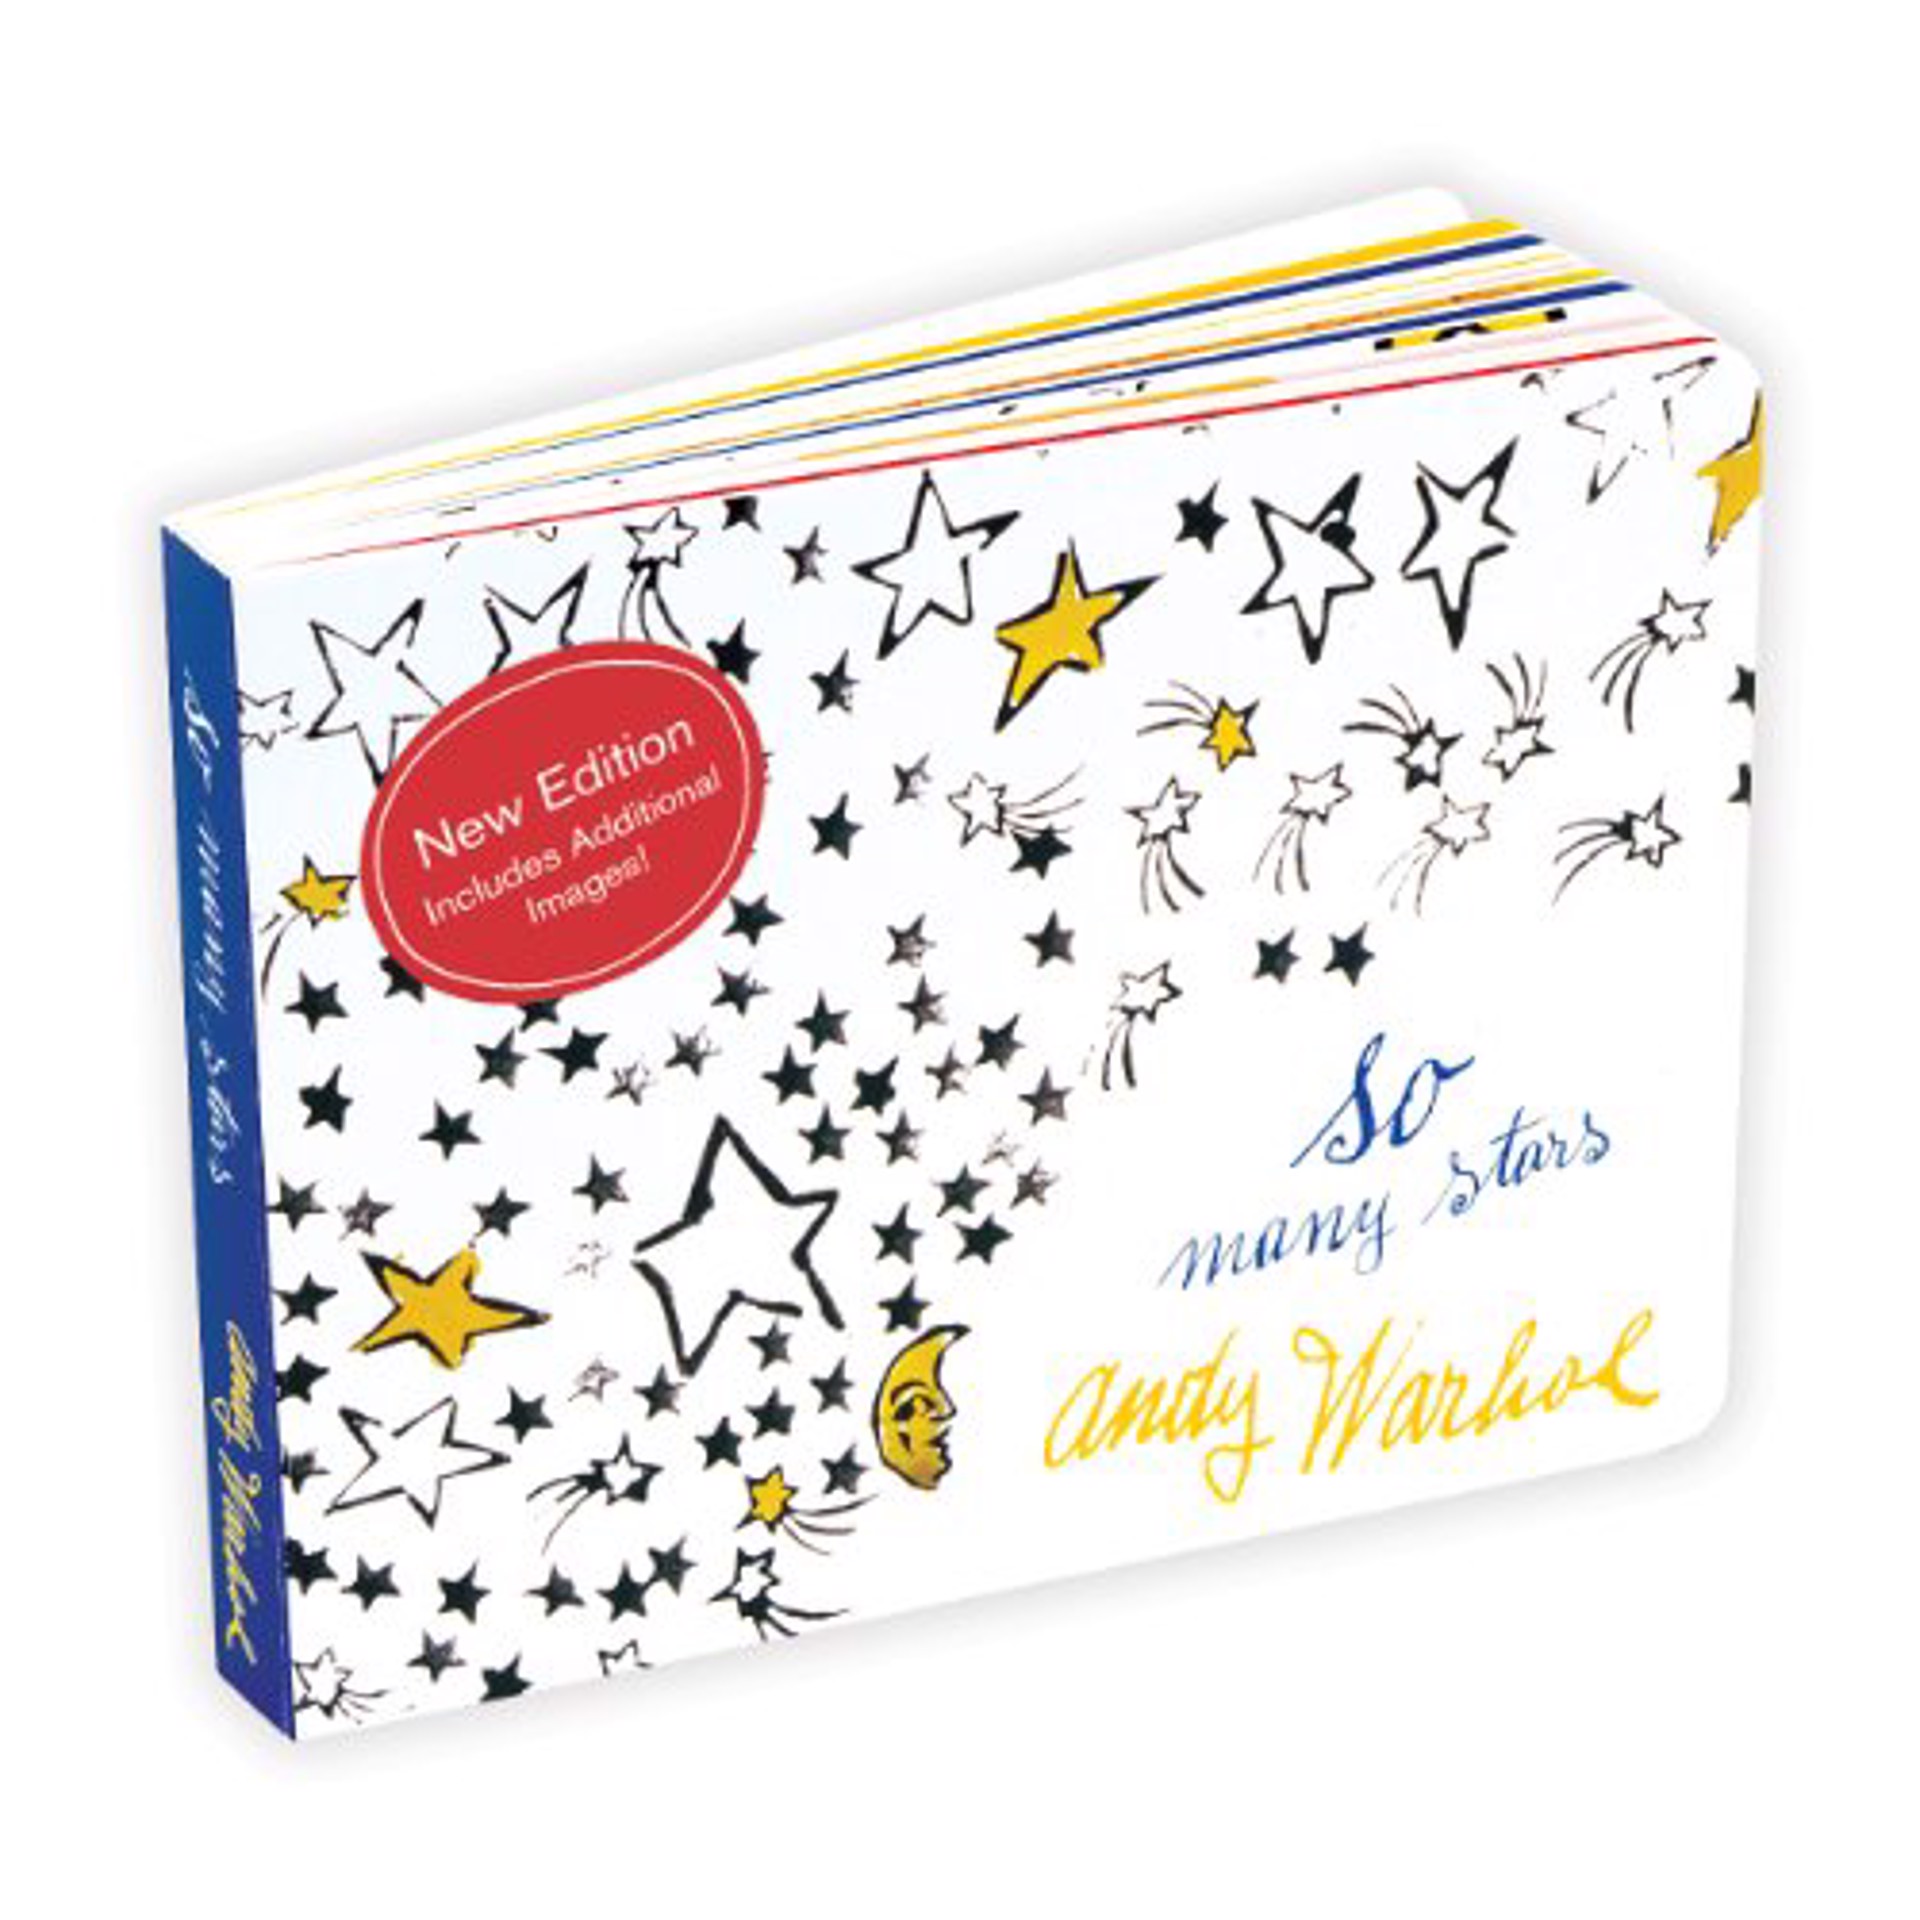 So Many Stars Board Book by Andy Warhol